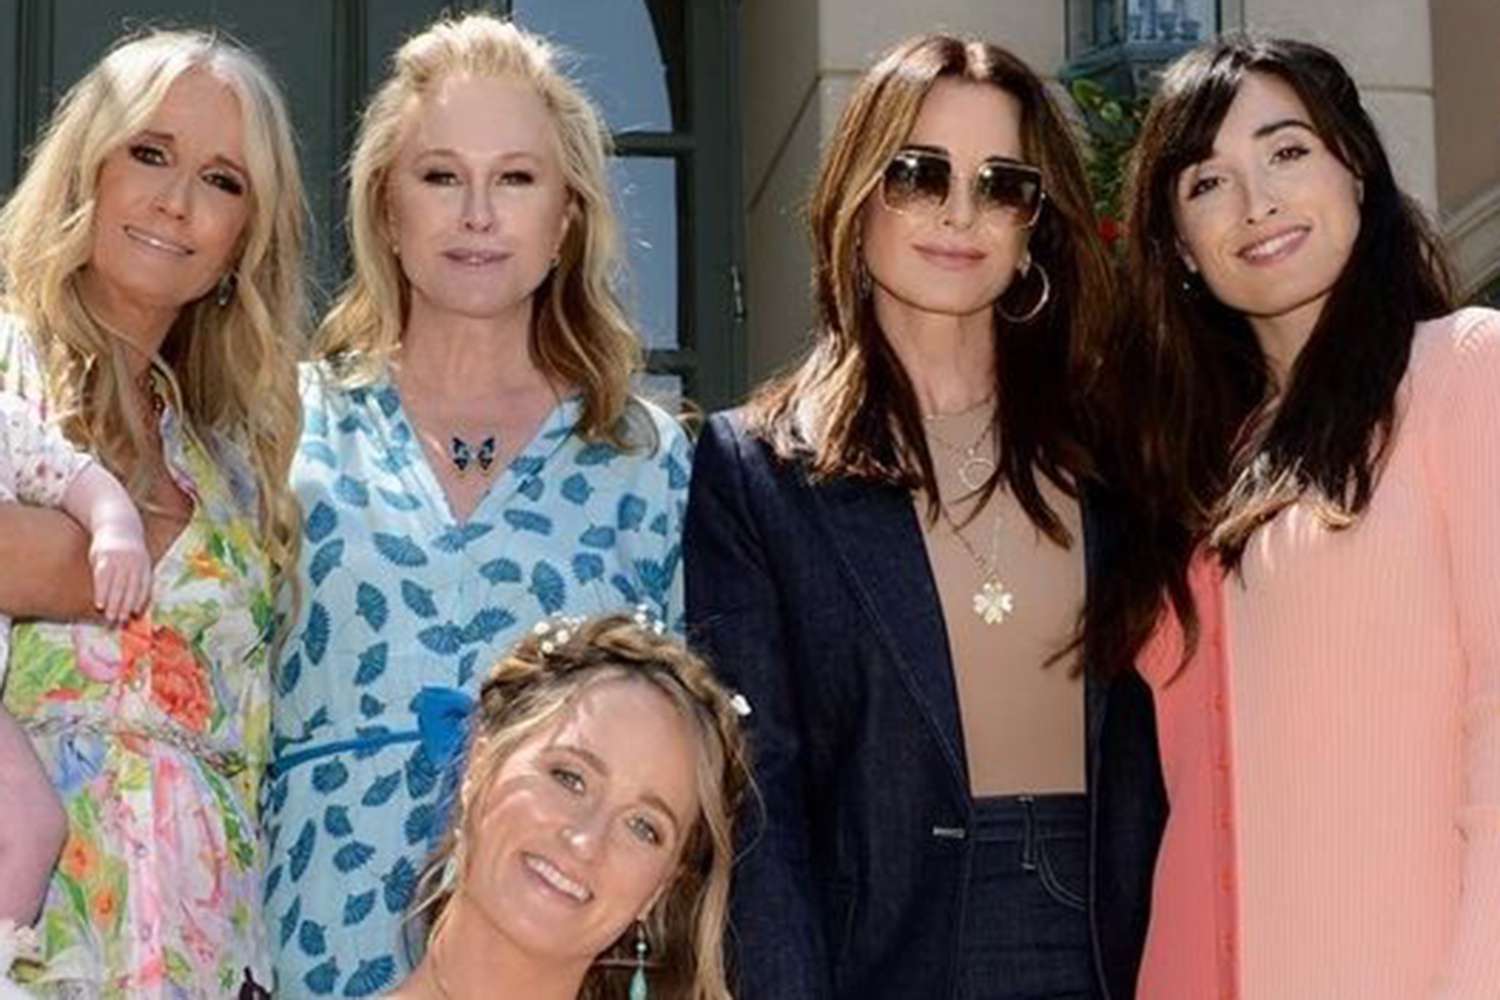 Kyle Richards Reunites with Sisters Kathy Hilton and Kim Richards For Niece’s Bridal Shower: ‘So Happy For You’